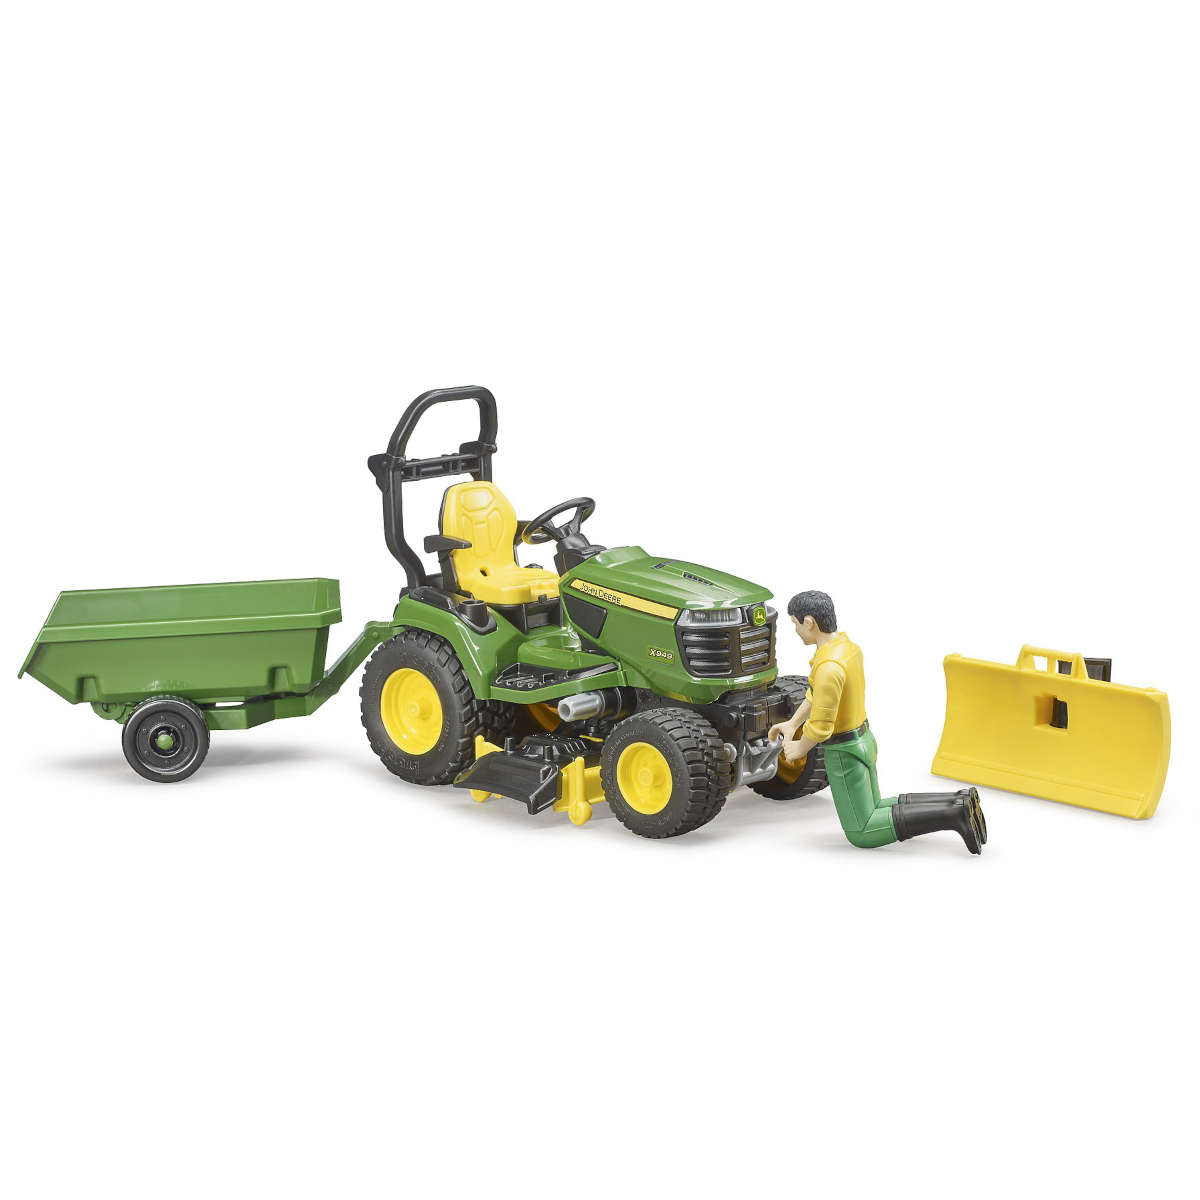 Bruder John Deere Lawn Tractor with Trailer and Figurine